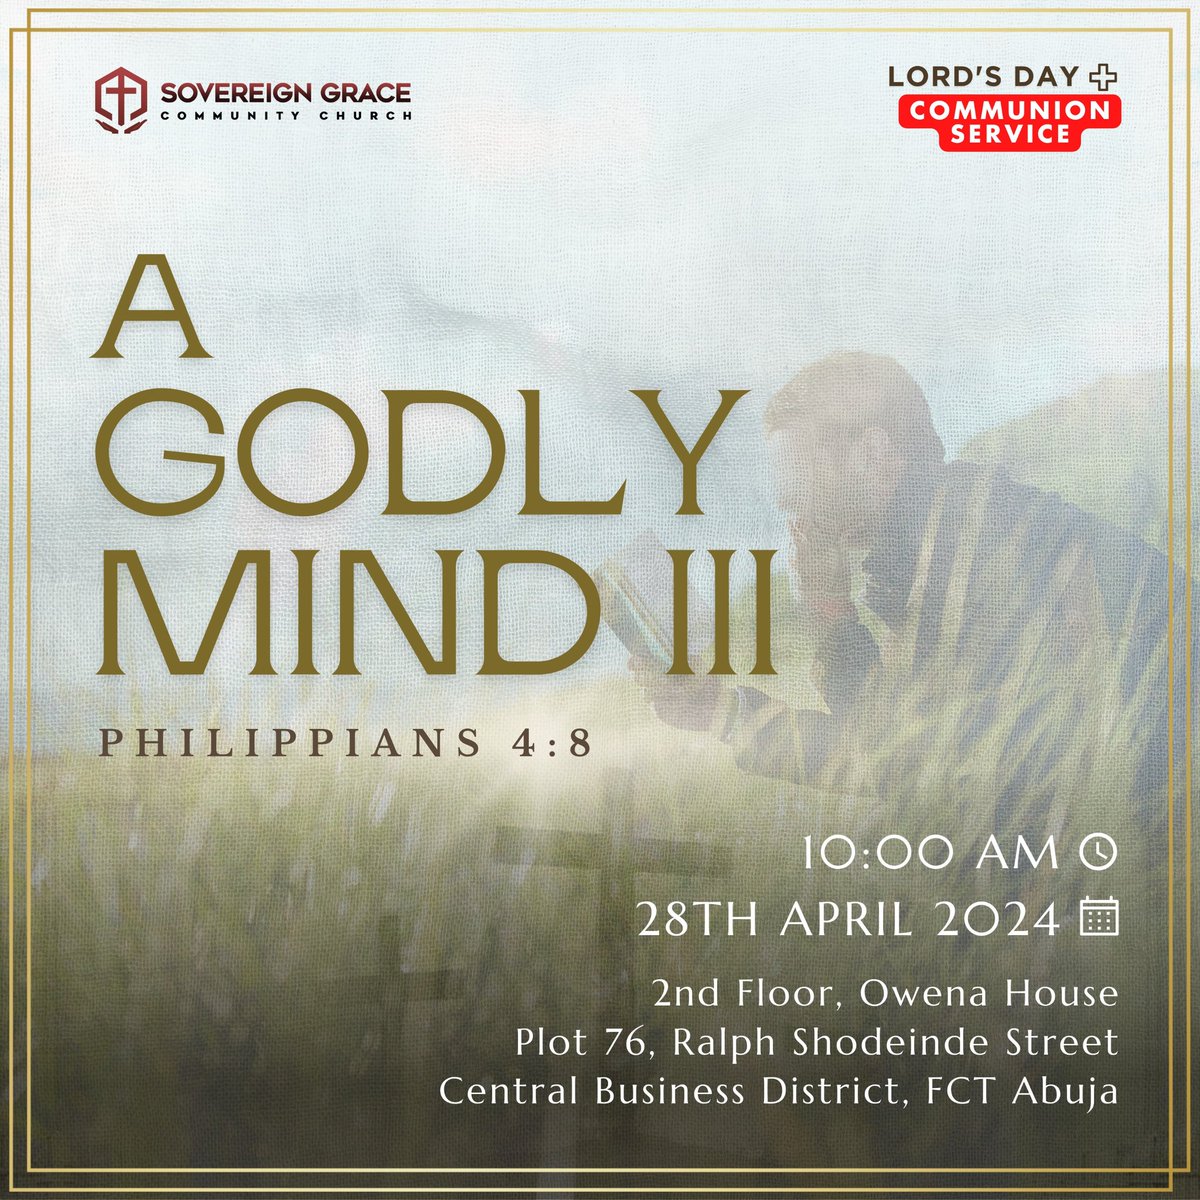 You're invited to join us tomorrow as we continue our journey through this most edifying series on what it means to have A Godly Mind.